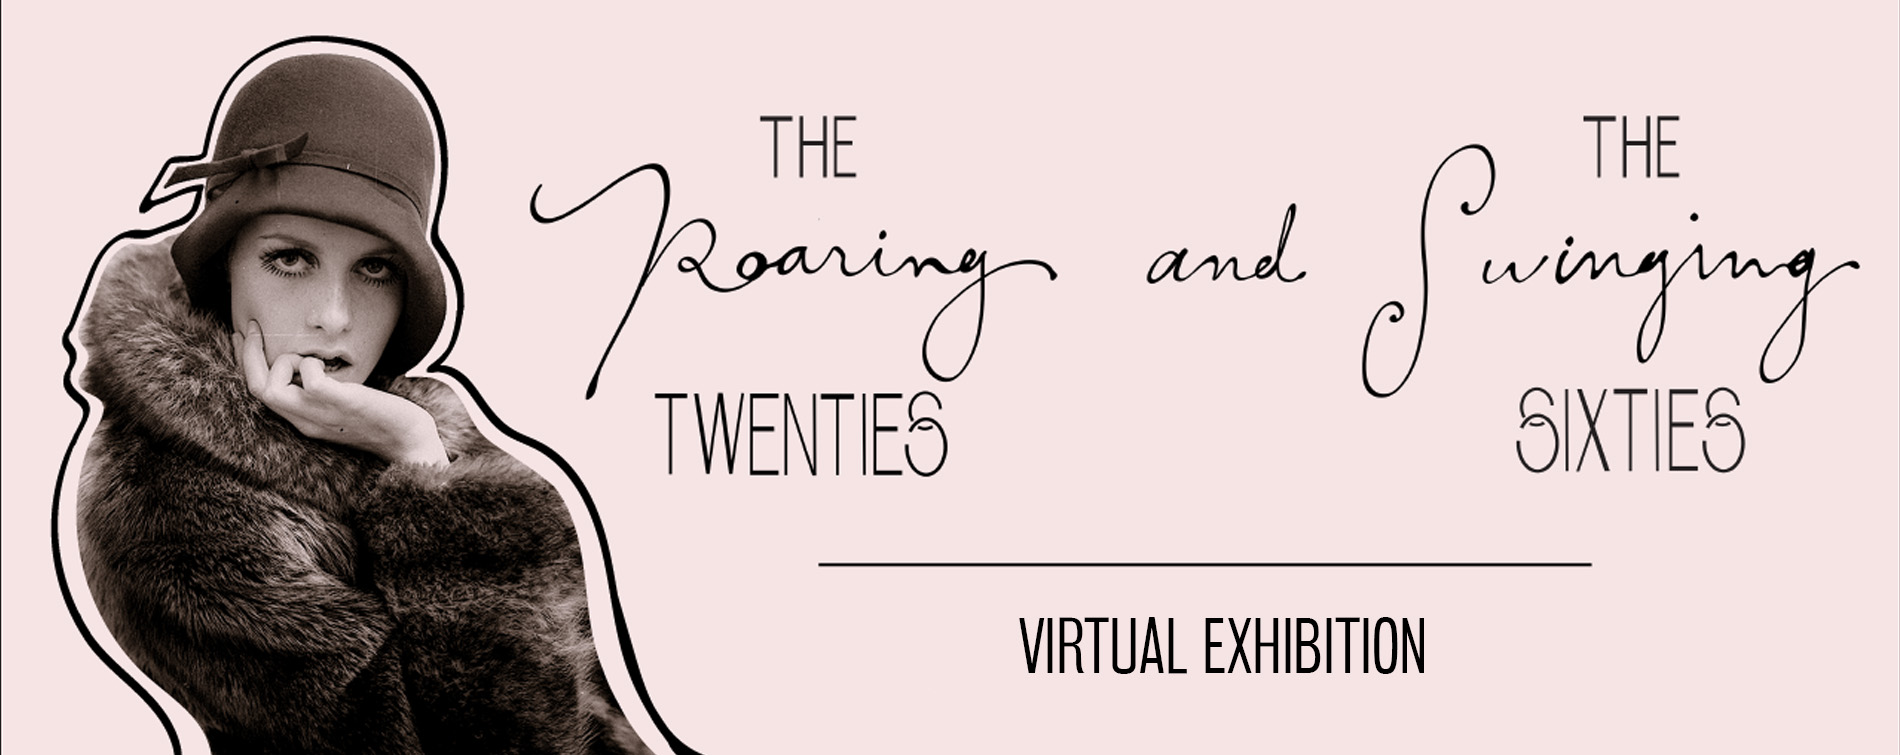 The Roaring Twenties and The Swinging Sixties virtual exhibition